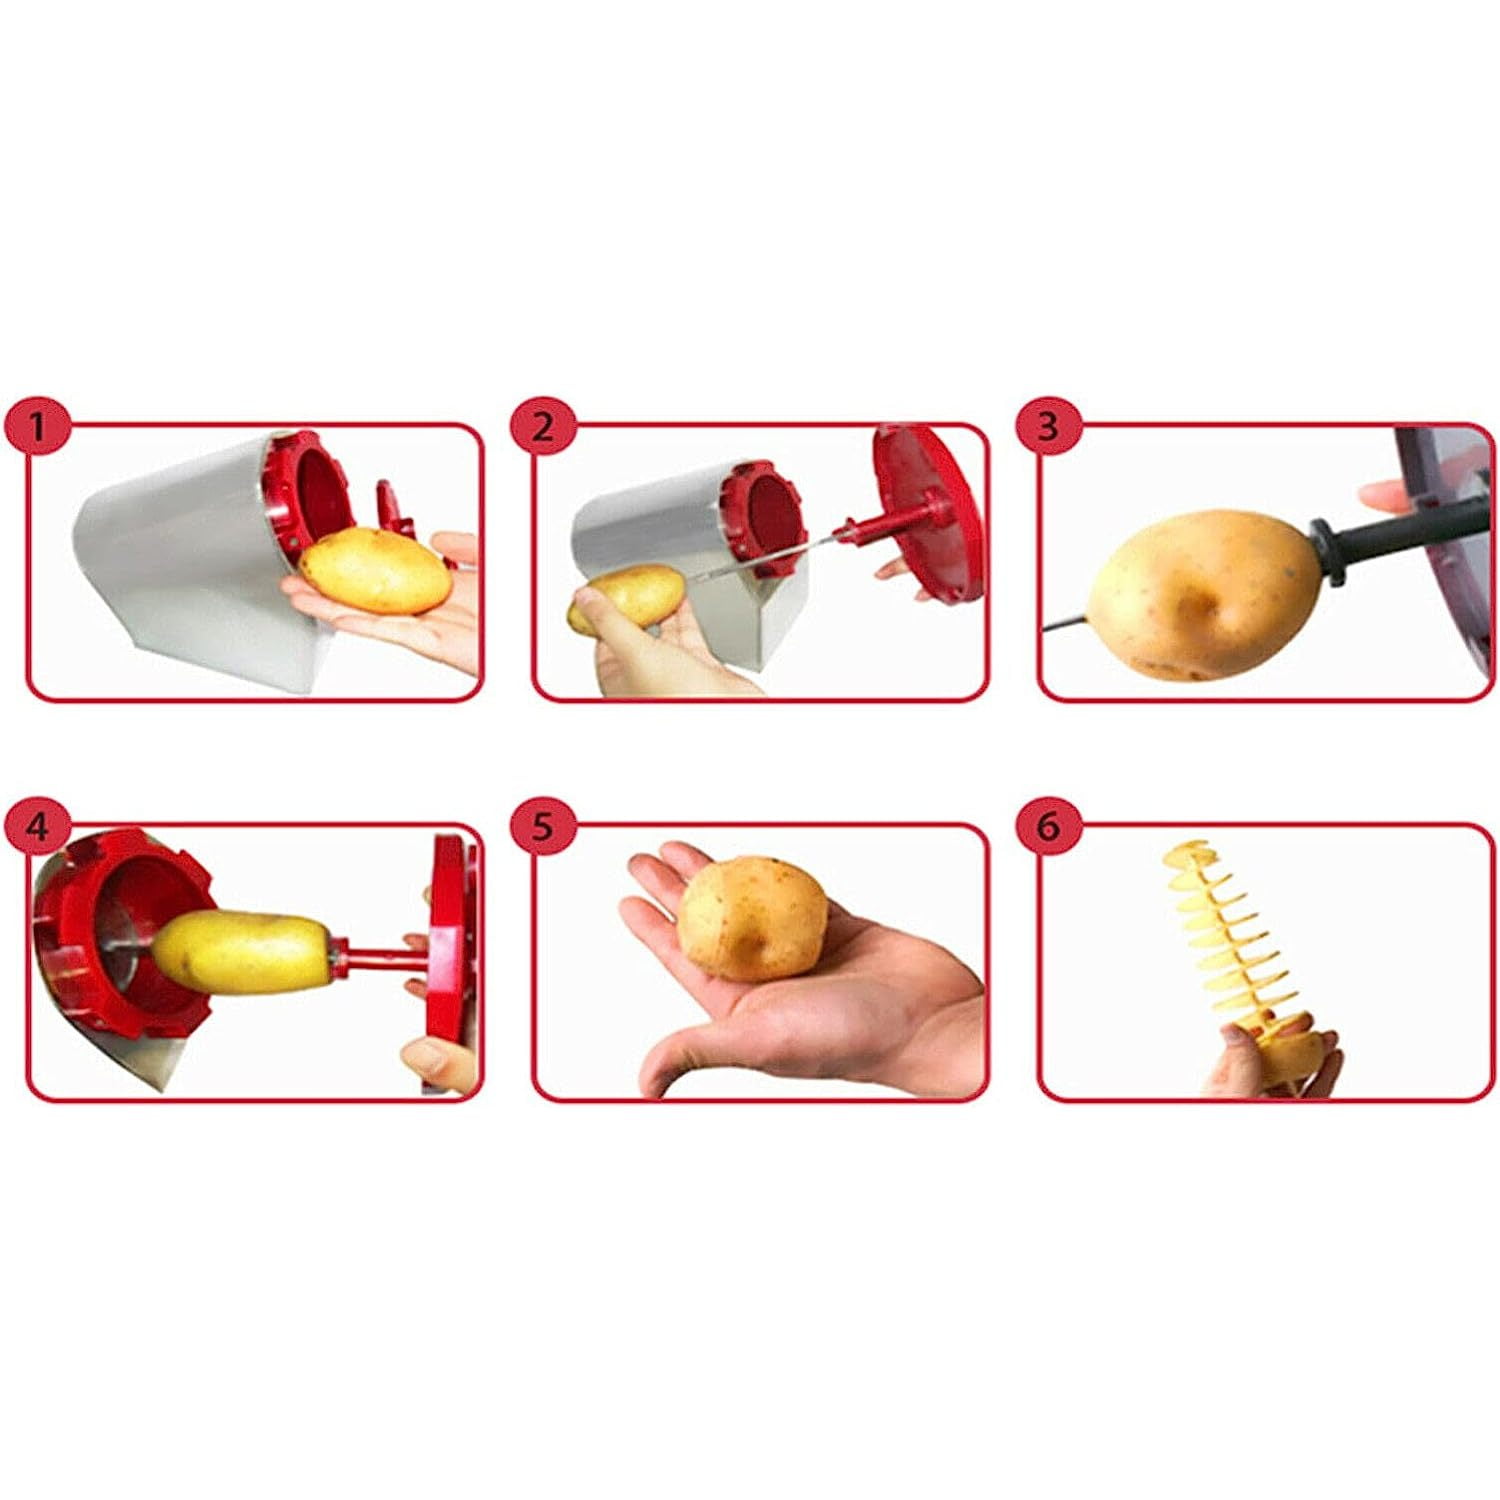 Twisted Potato Slicer, Cortador de Papas en Espiral Tornado Curly Fry Cutter with Stainless Steel Skewers, Manual Spiral French Fries Cucumbers